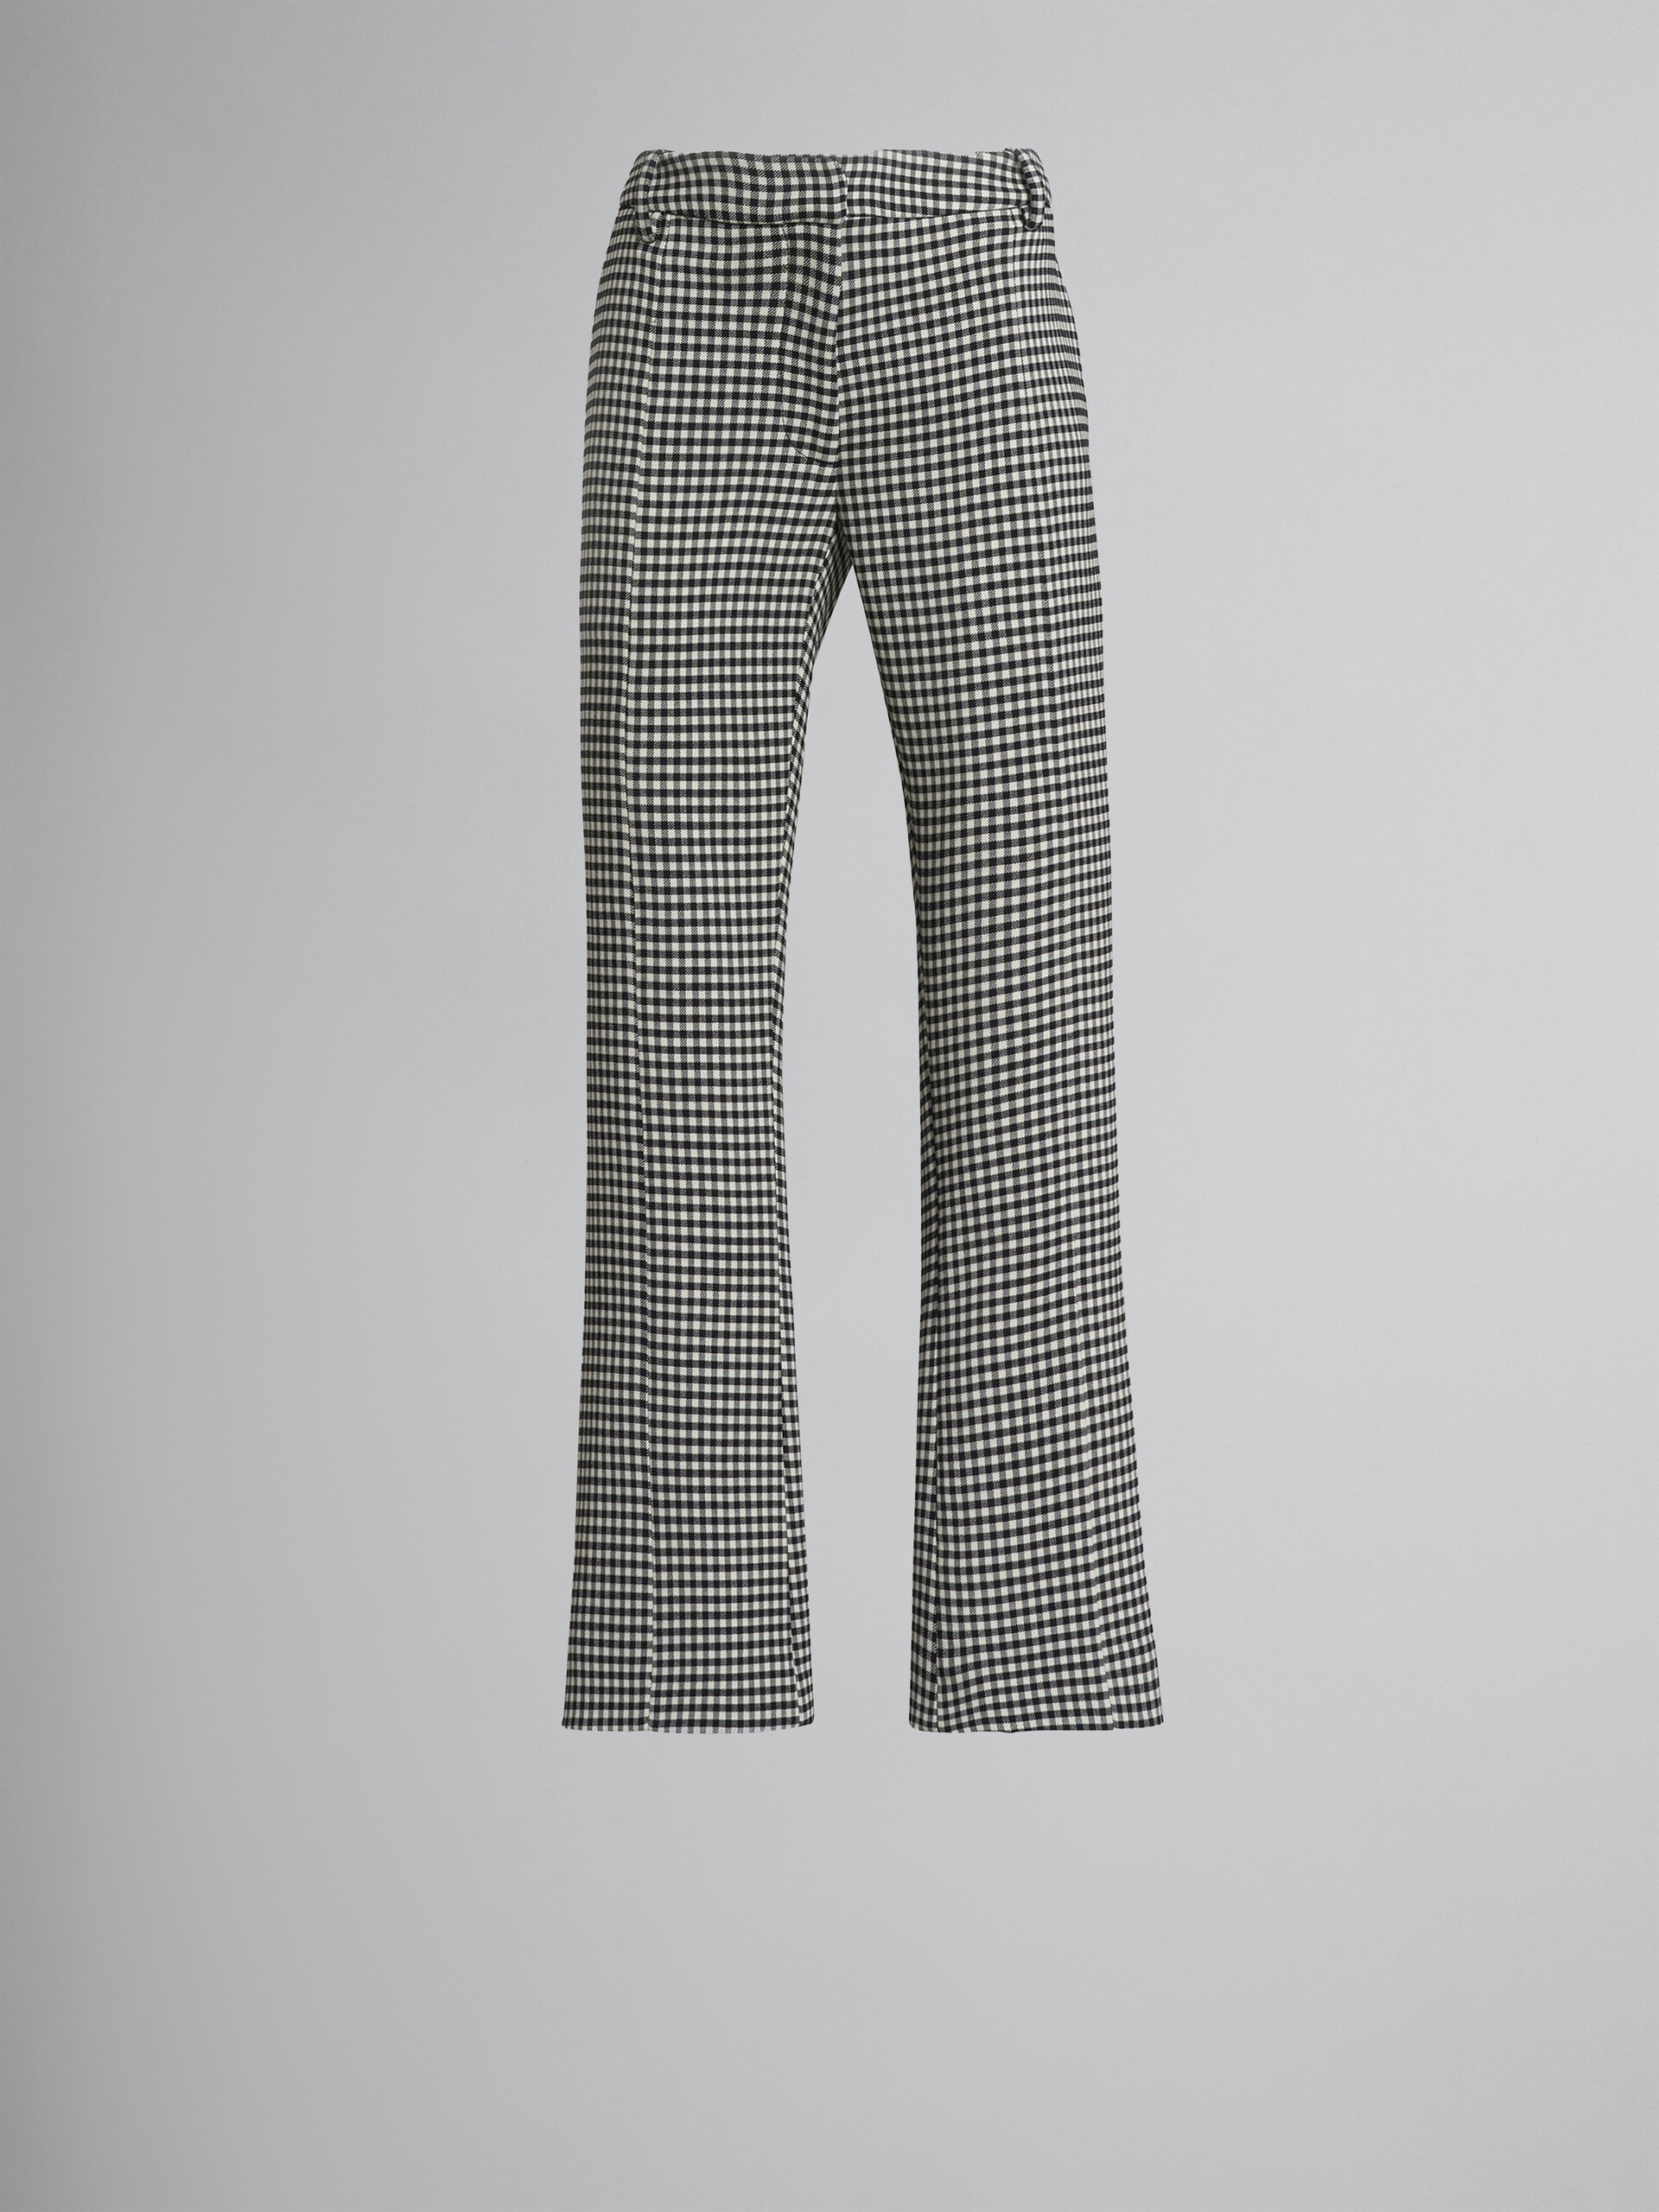 Double-faced houndstooth wool trousers - Pants - Image 1